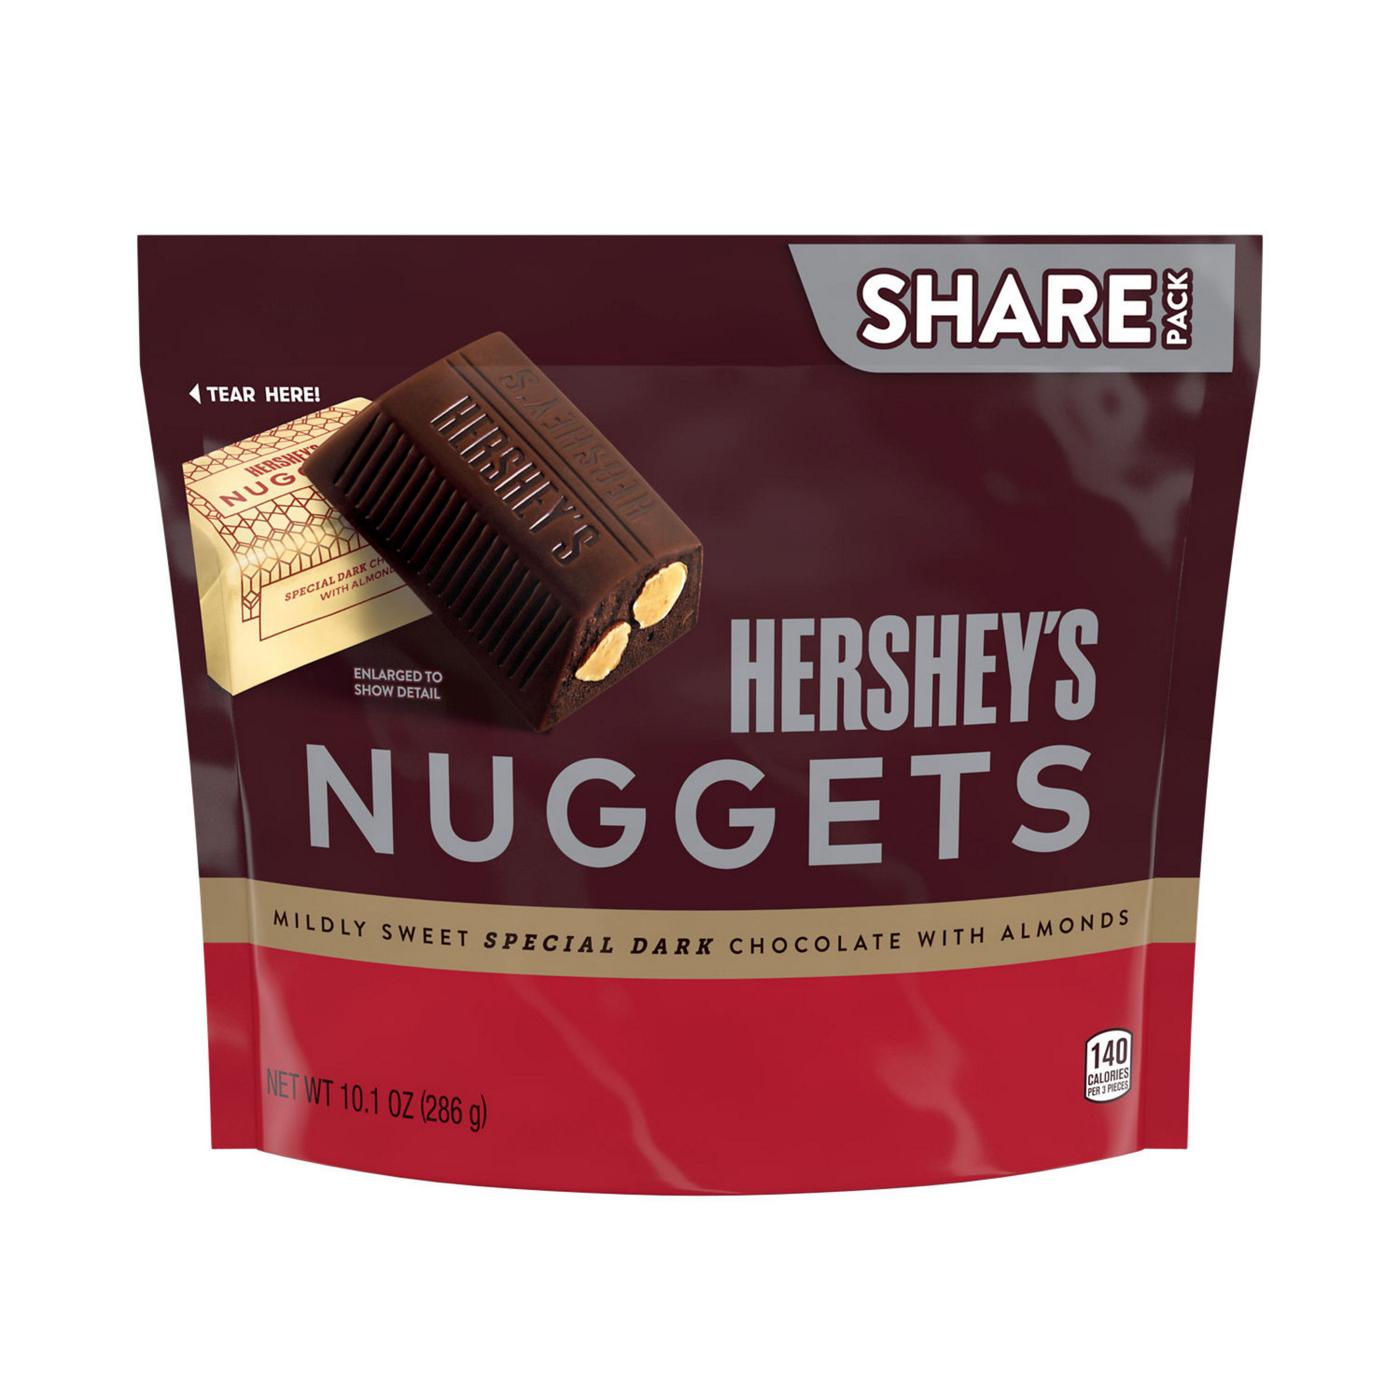 Hershey's Nuggets Special Dark Chocolate Candy with Almonds Share Pack; image 1 of 7